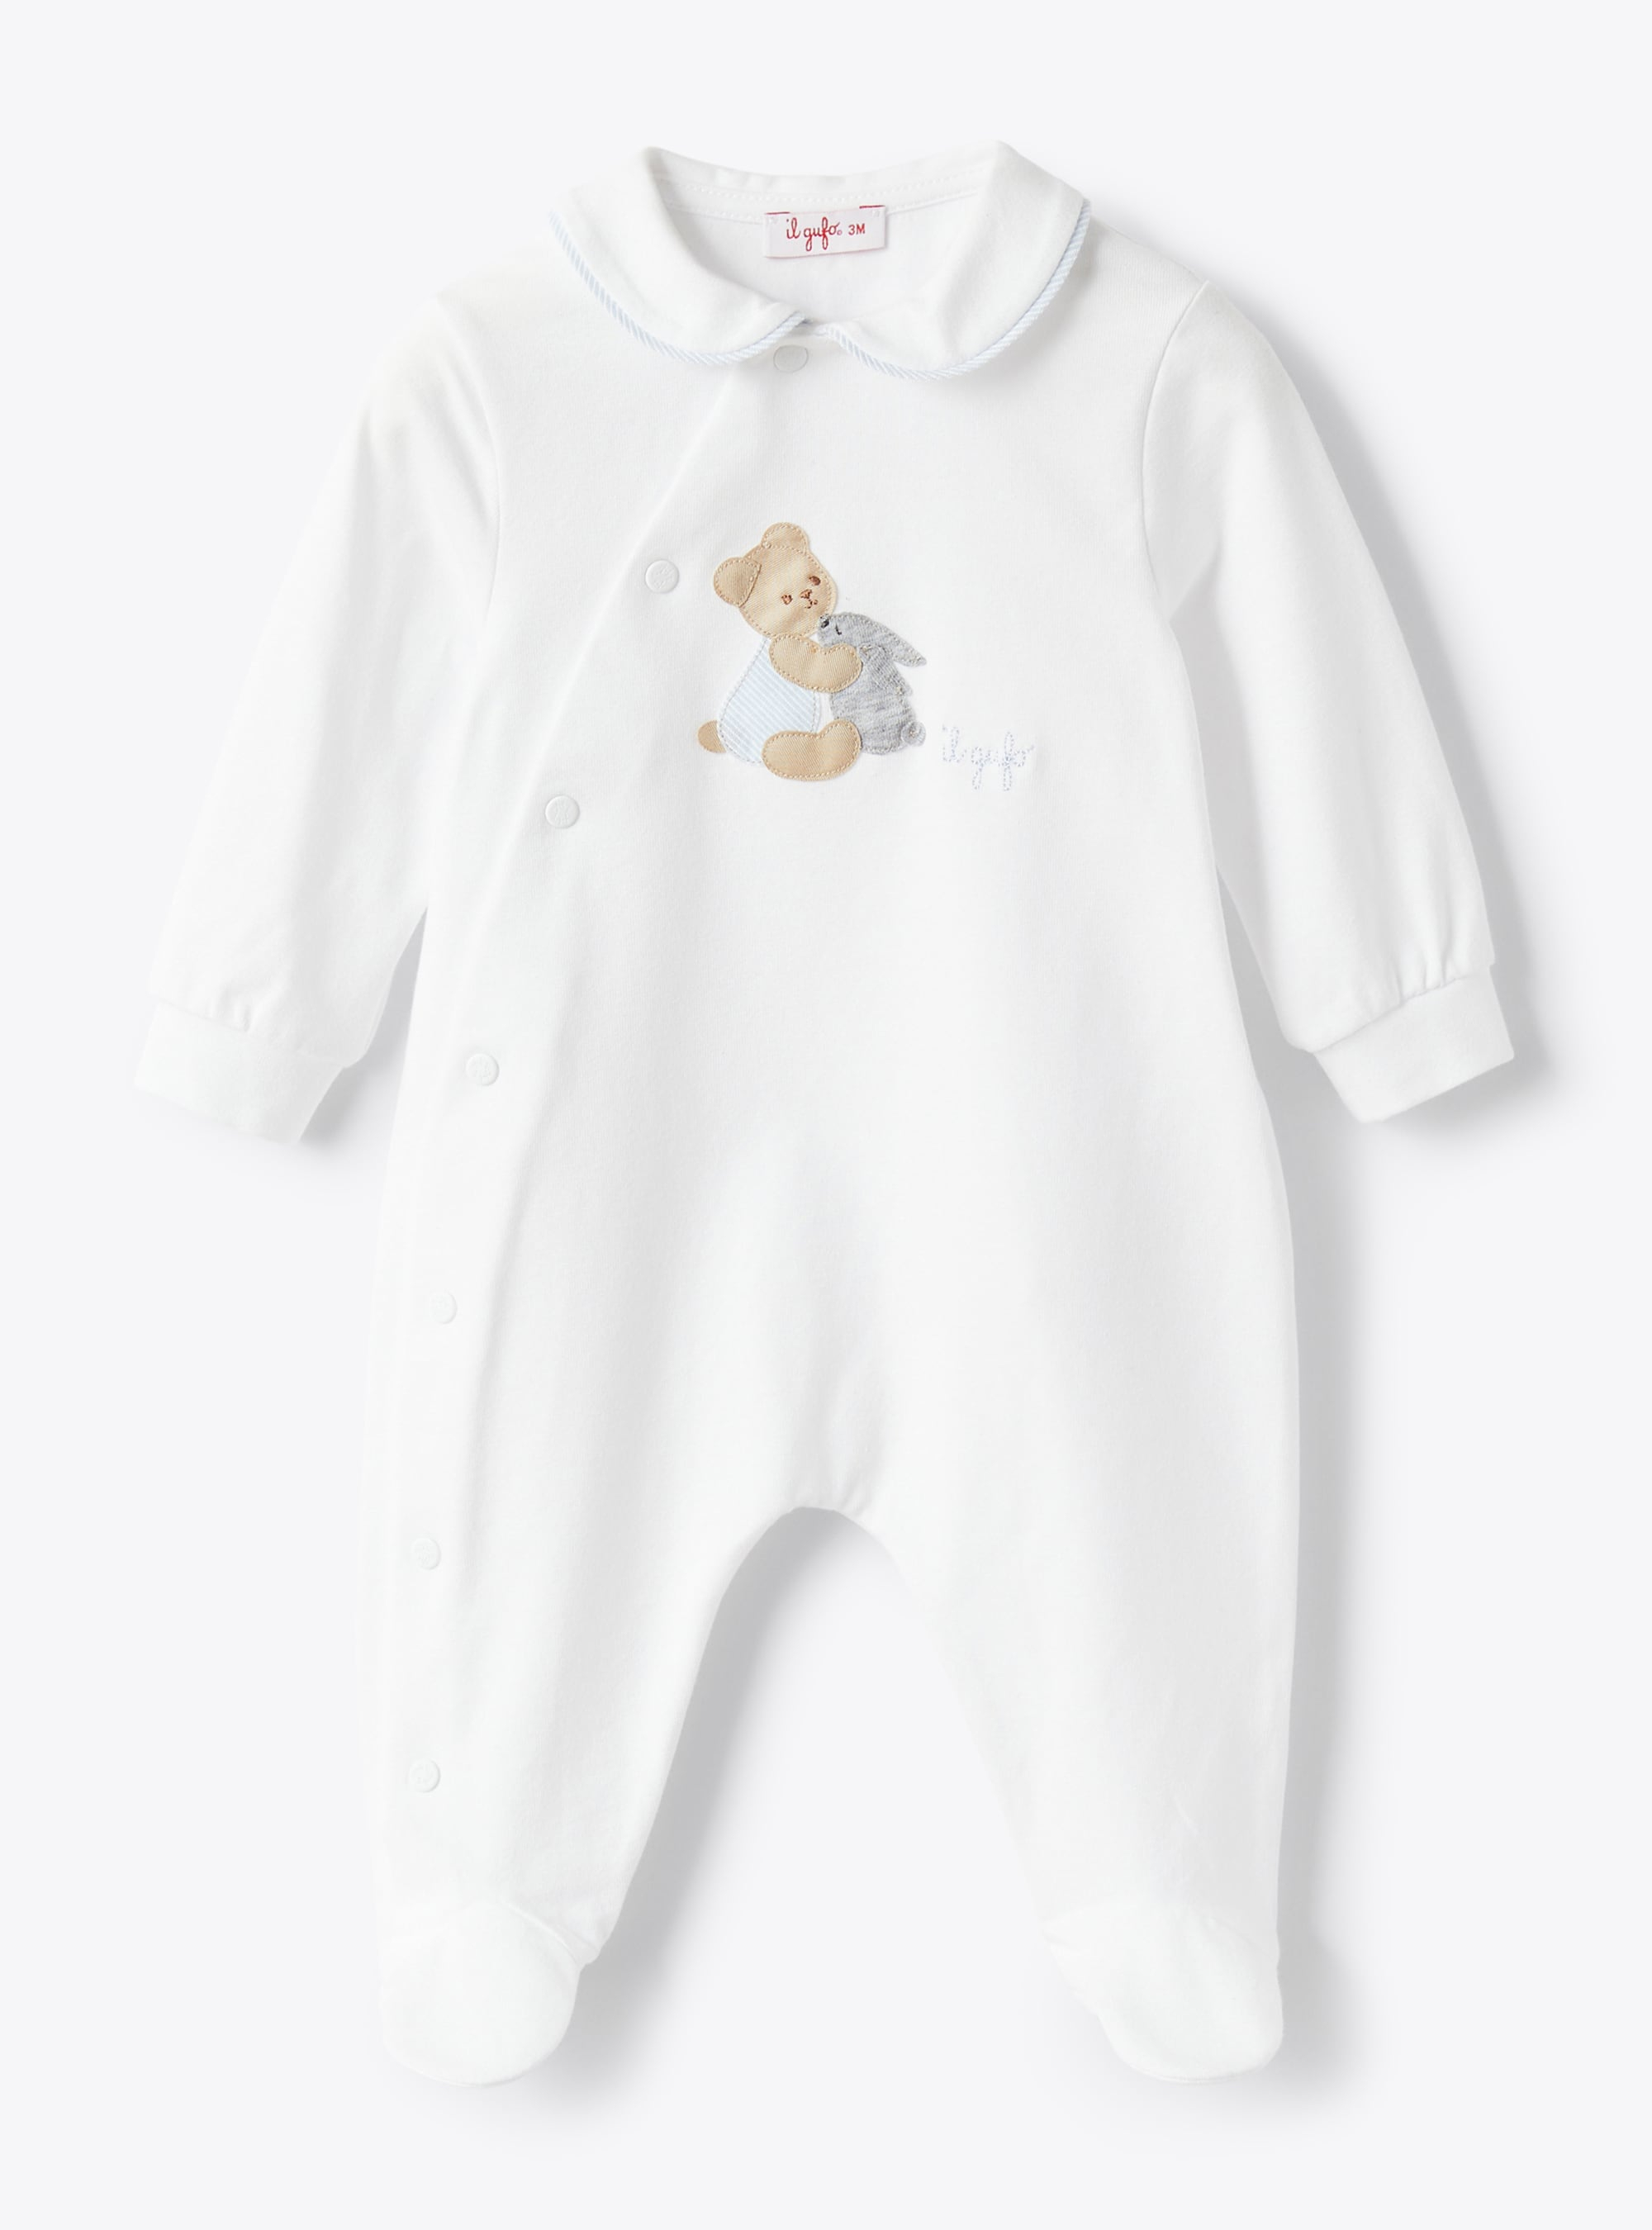 Jersey sleepsuit with bear picture - White | Il Gufo